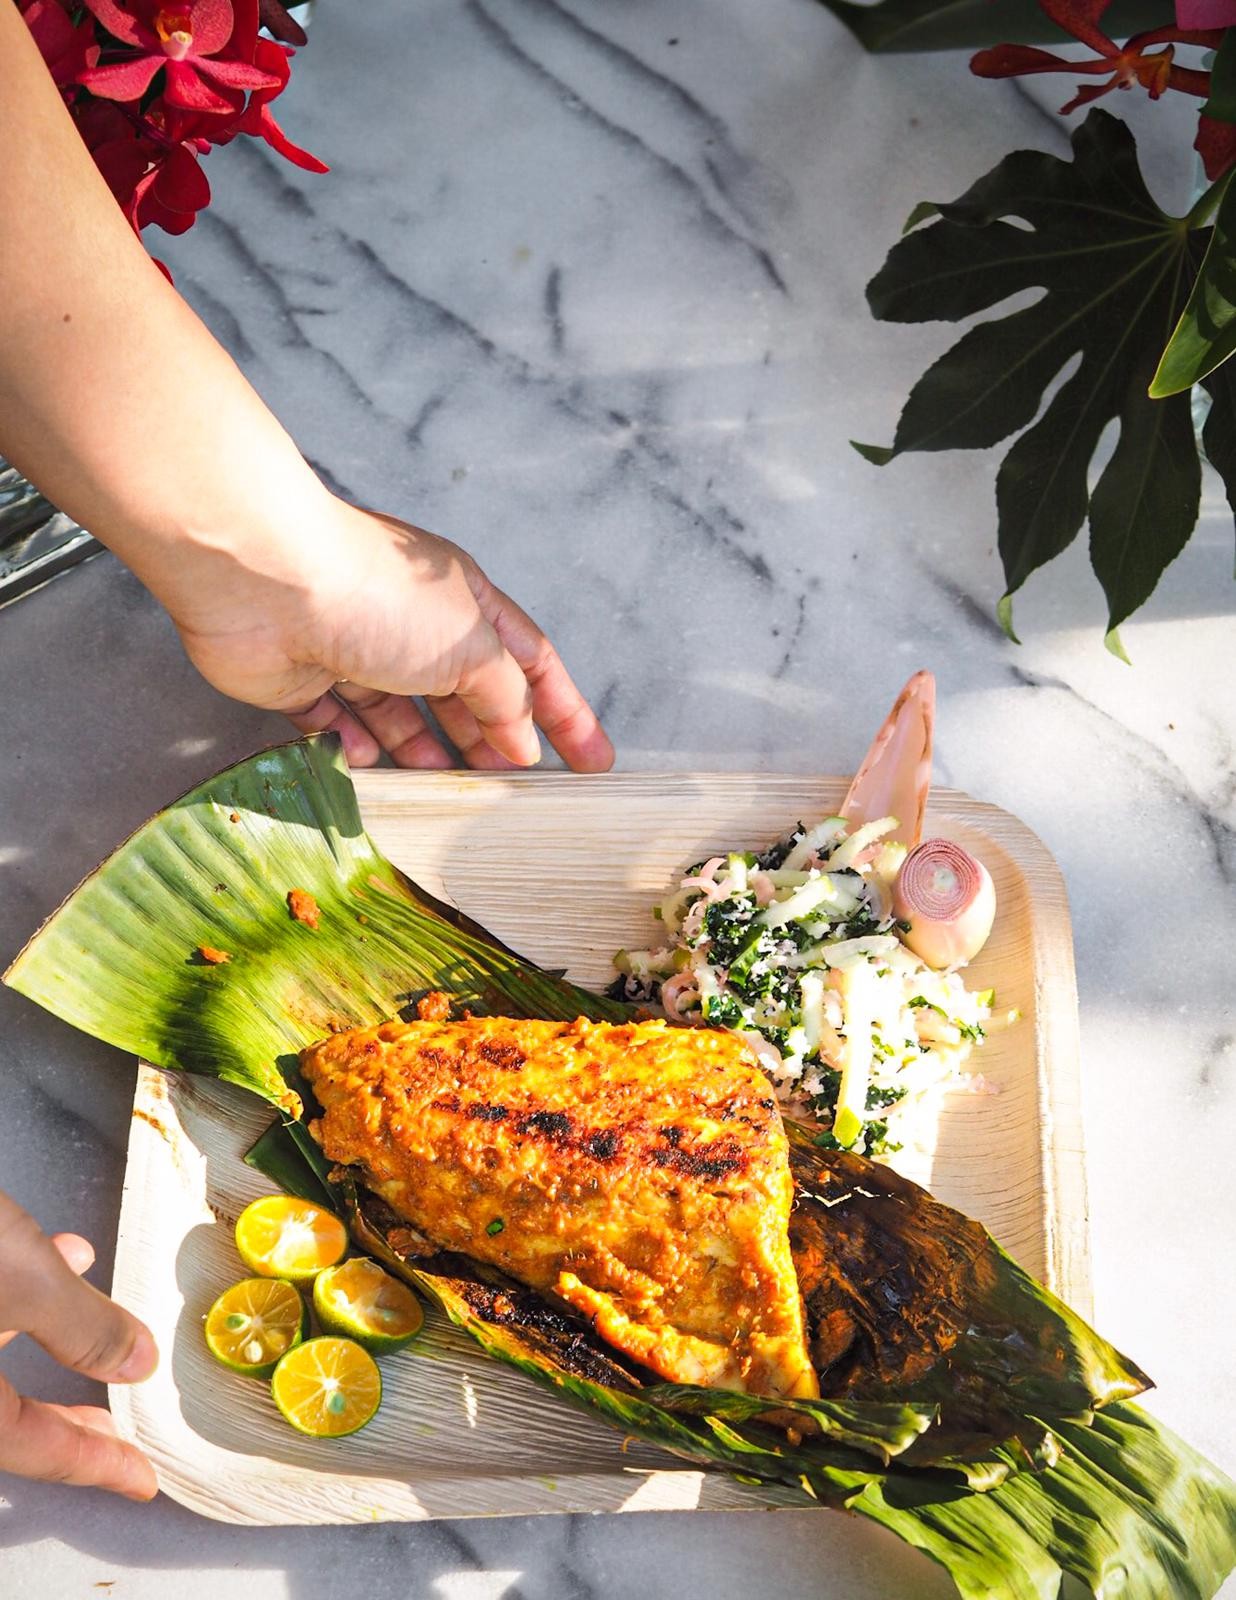 Barramundi with turmeric, galangal, lemongrass served with torched ginger, coconut, and apple slaw at a Once Upon A Secret Supper event in Singapore. Photo: Elodie Bellegrade